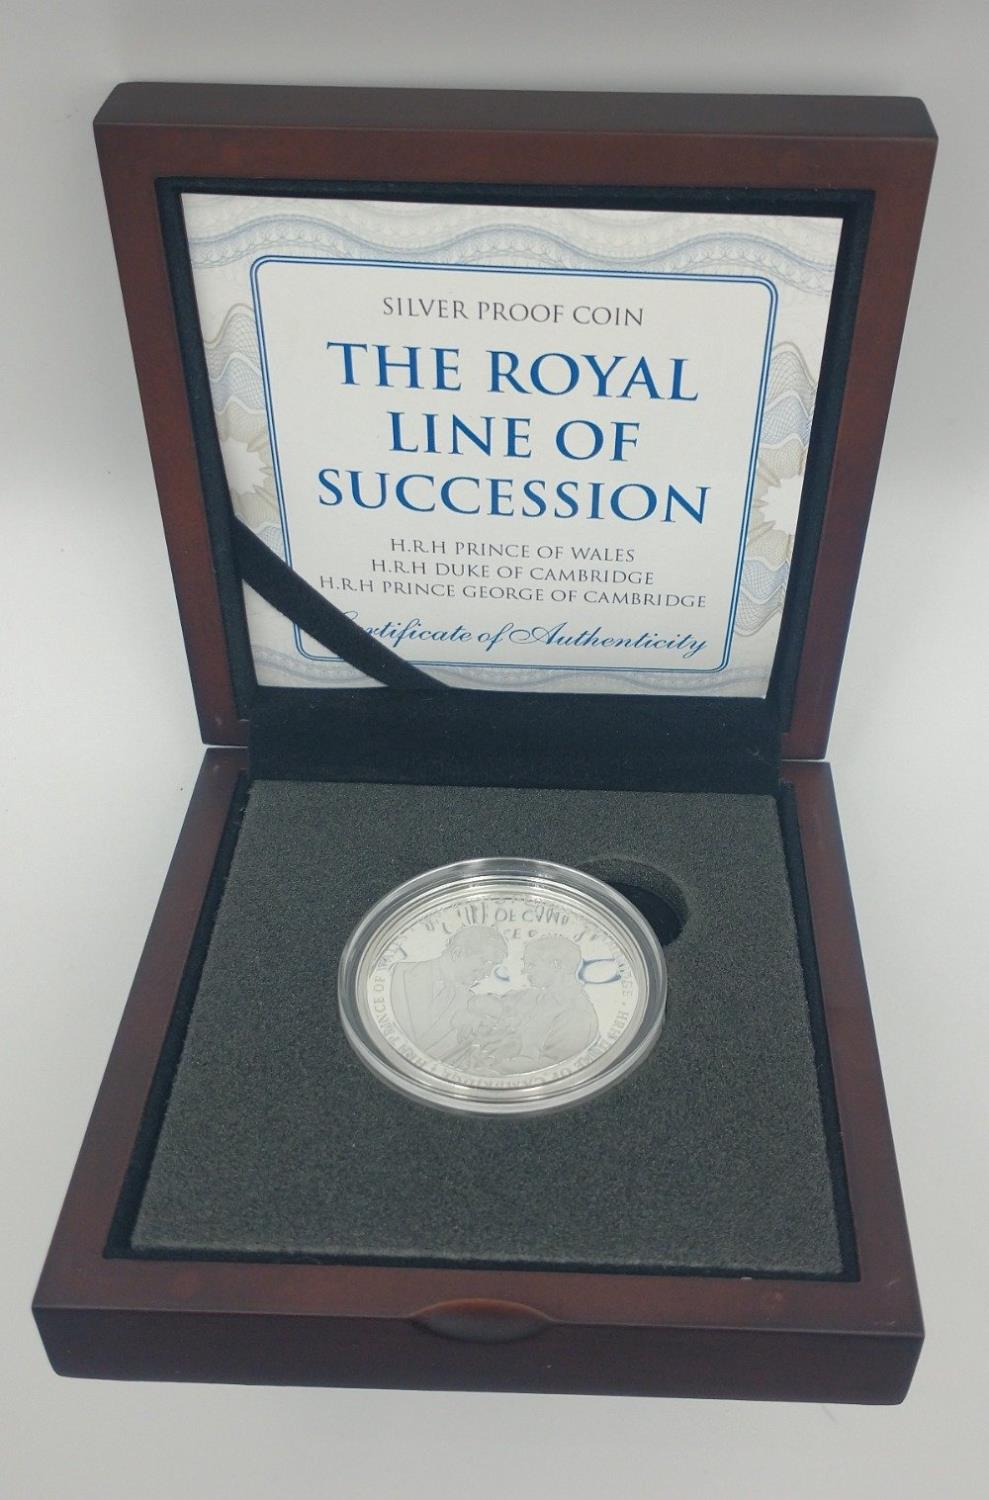 SILVER PROOF COIN 'The Royal Line Of Succession with certificate celebrating Prince Of Wales, Duke - Image 5 of 5